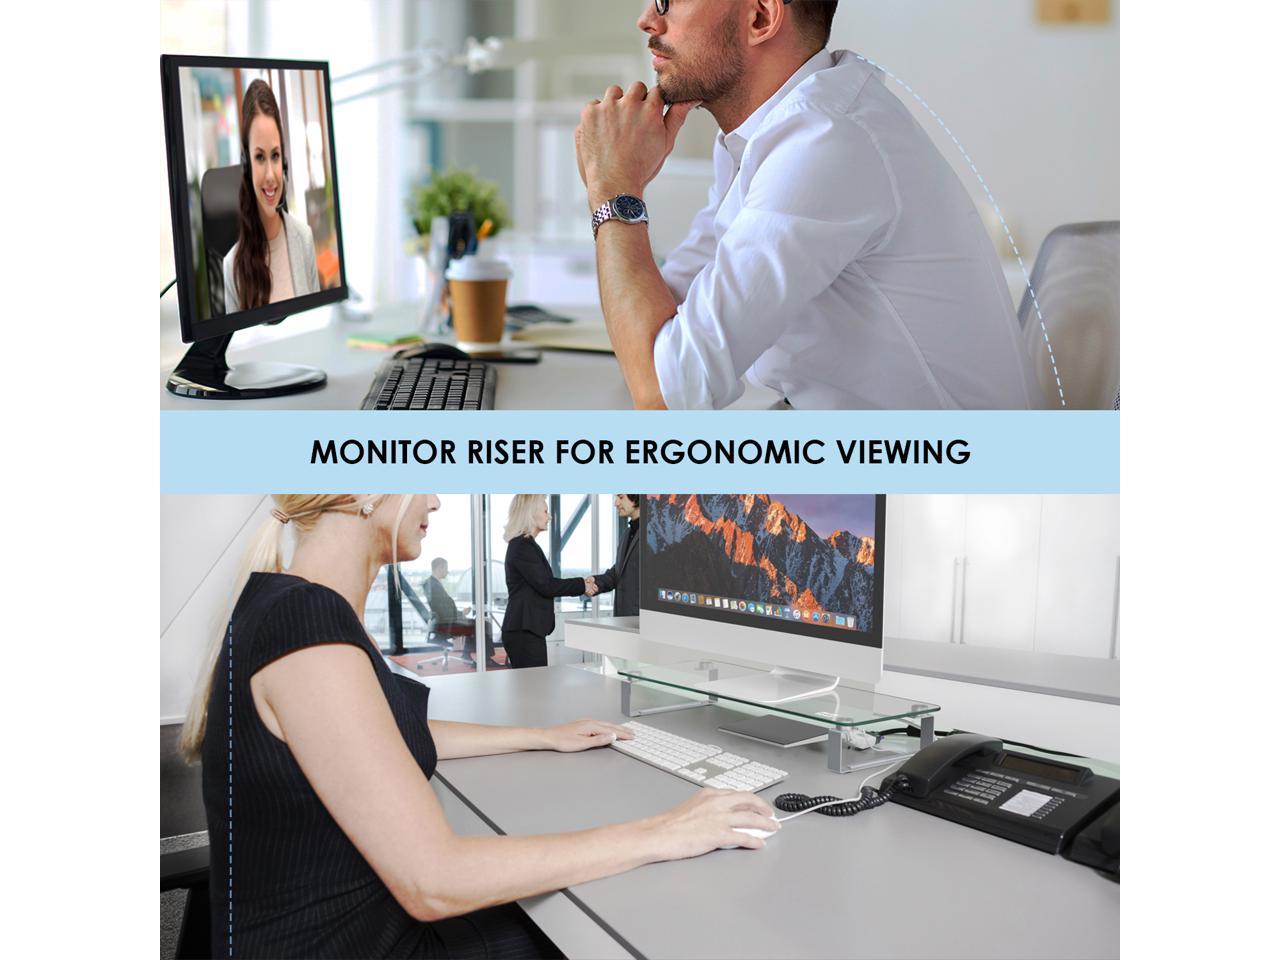 Extra Long Monitor Desk Riser Mount-It Desktop Organizer for Double Computer Screens BLACK 39 inches Extra Wide, 44 Lbs Capacity TVs Printers Laptops Consoles Desktops 